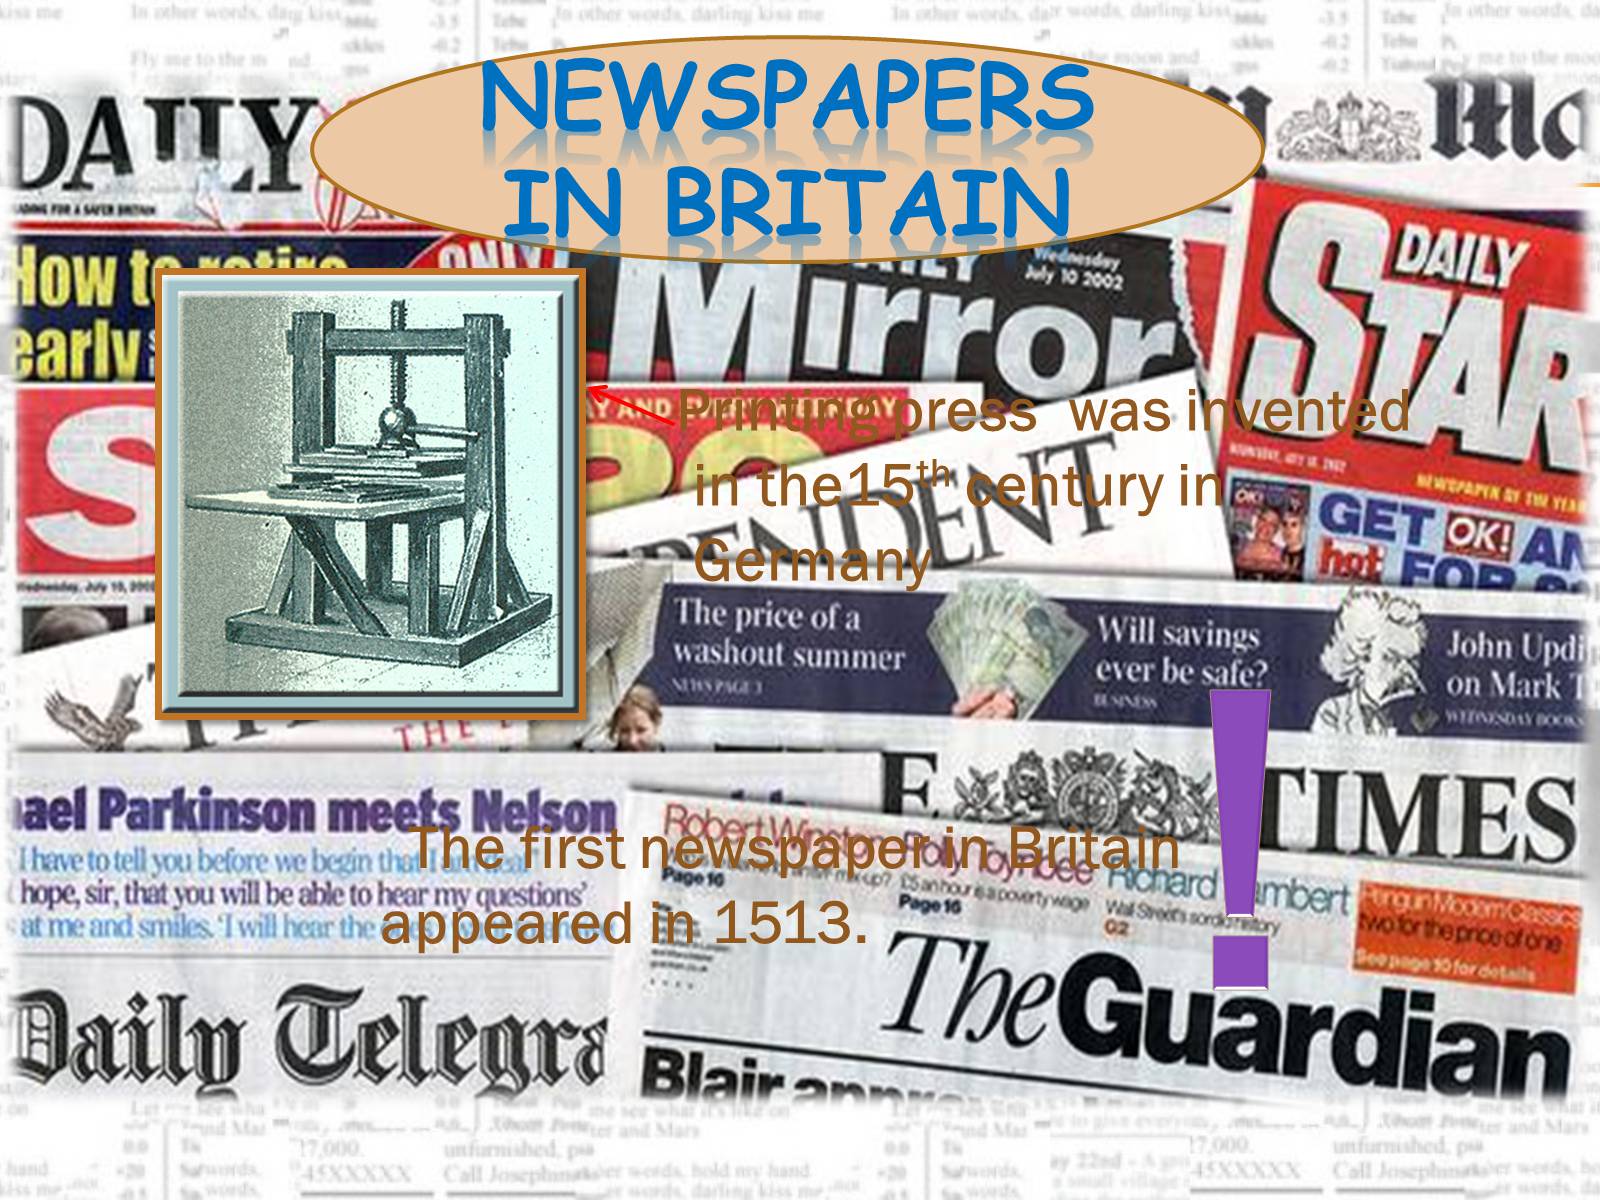 Newspapers com. Newspapers in Britain. Презентация на тему newspapers. Mass Media презентация. Mass Media newspapers.